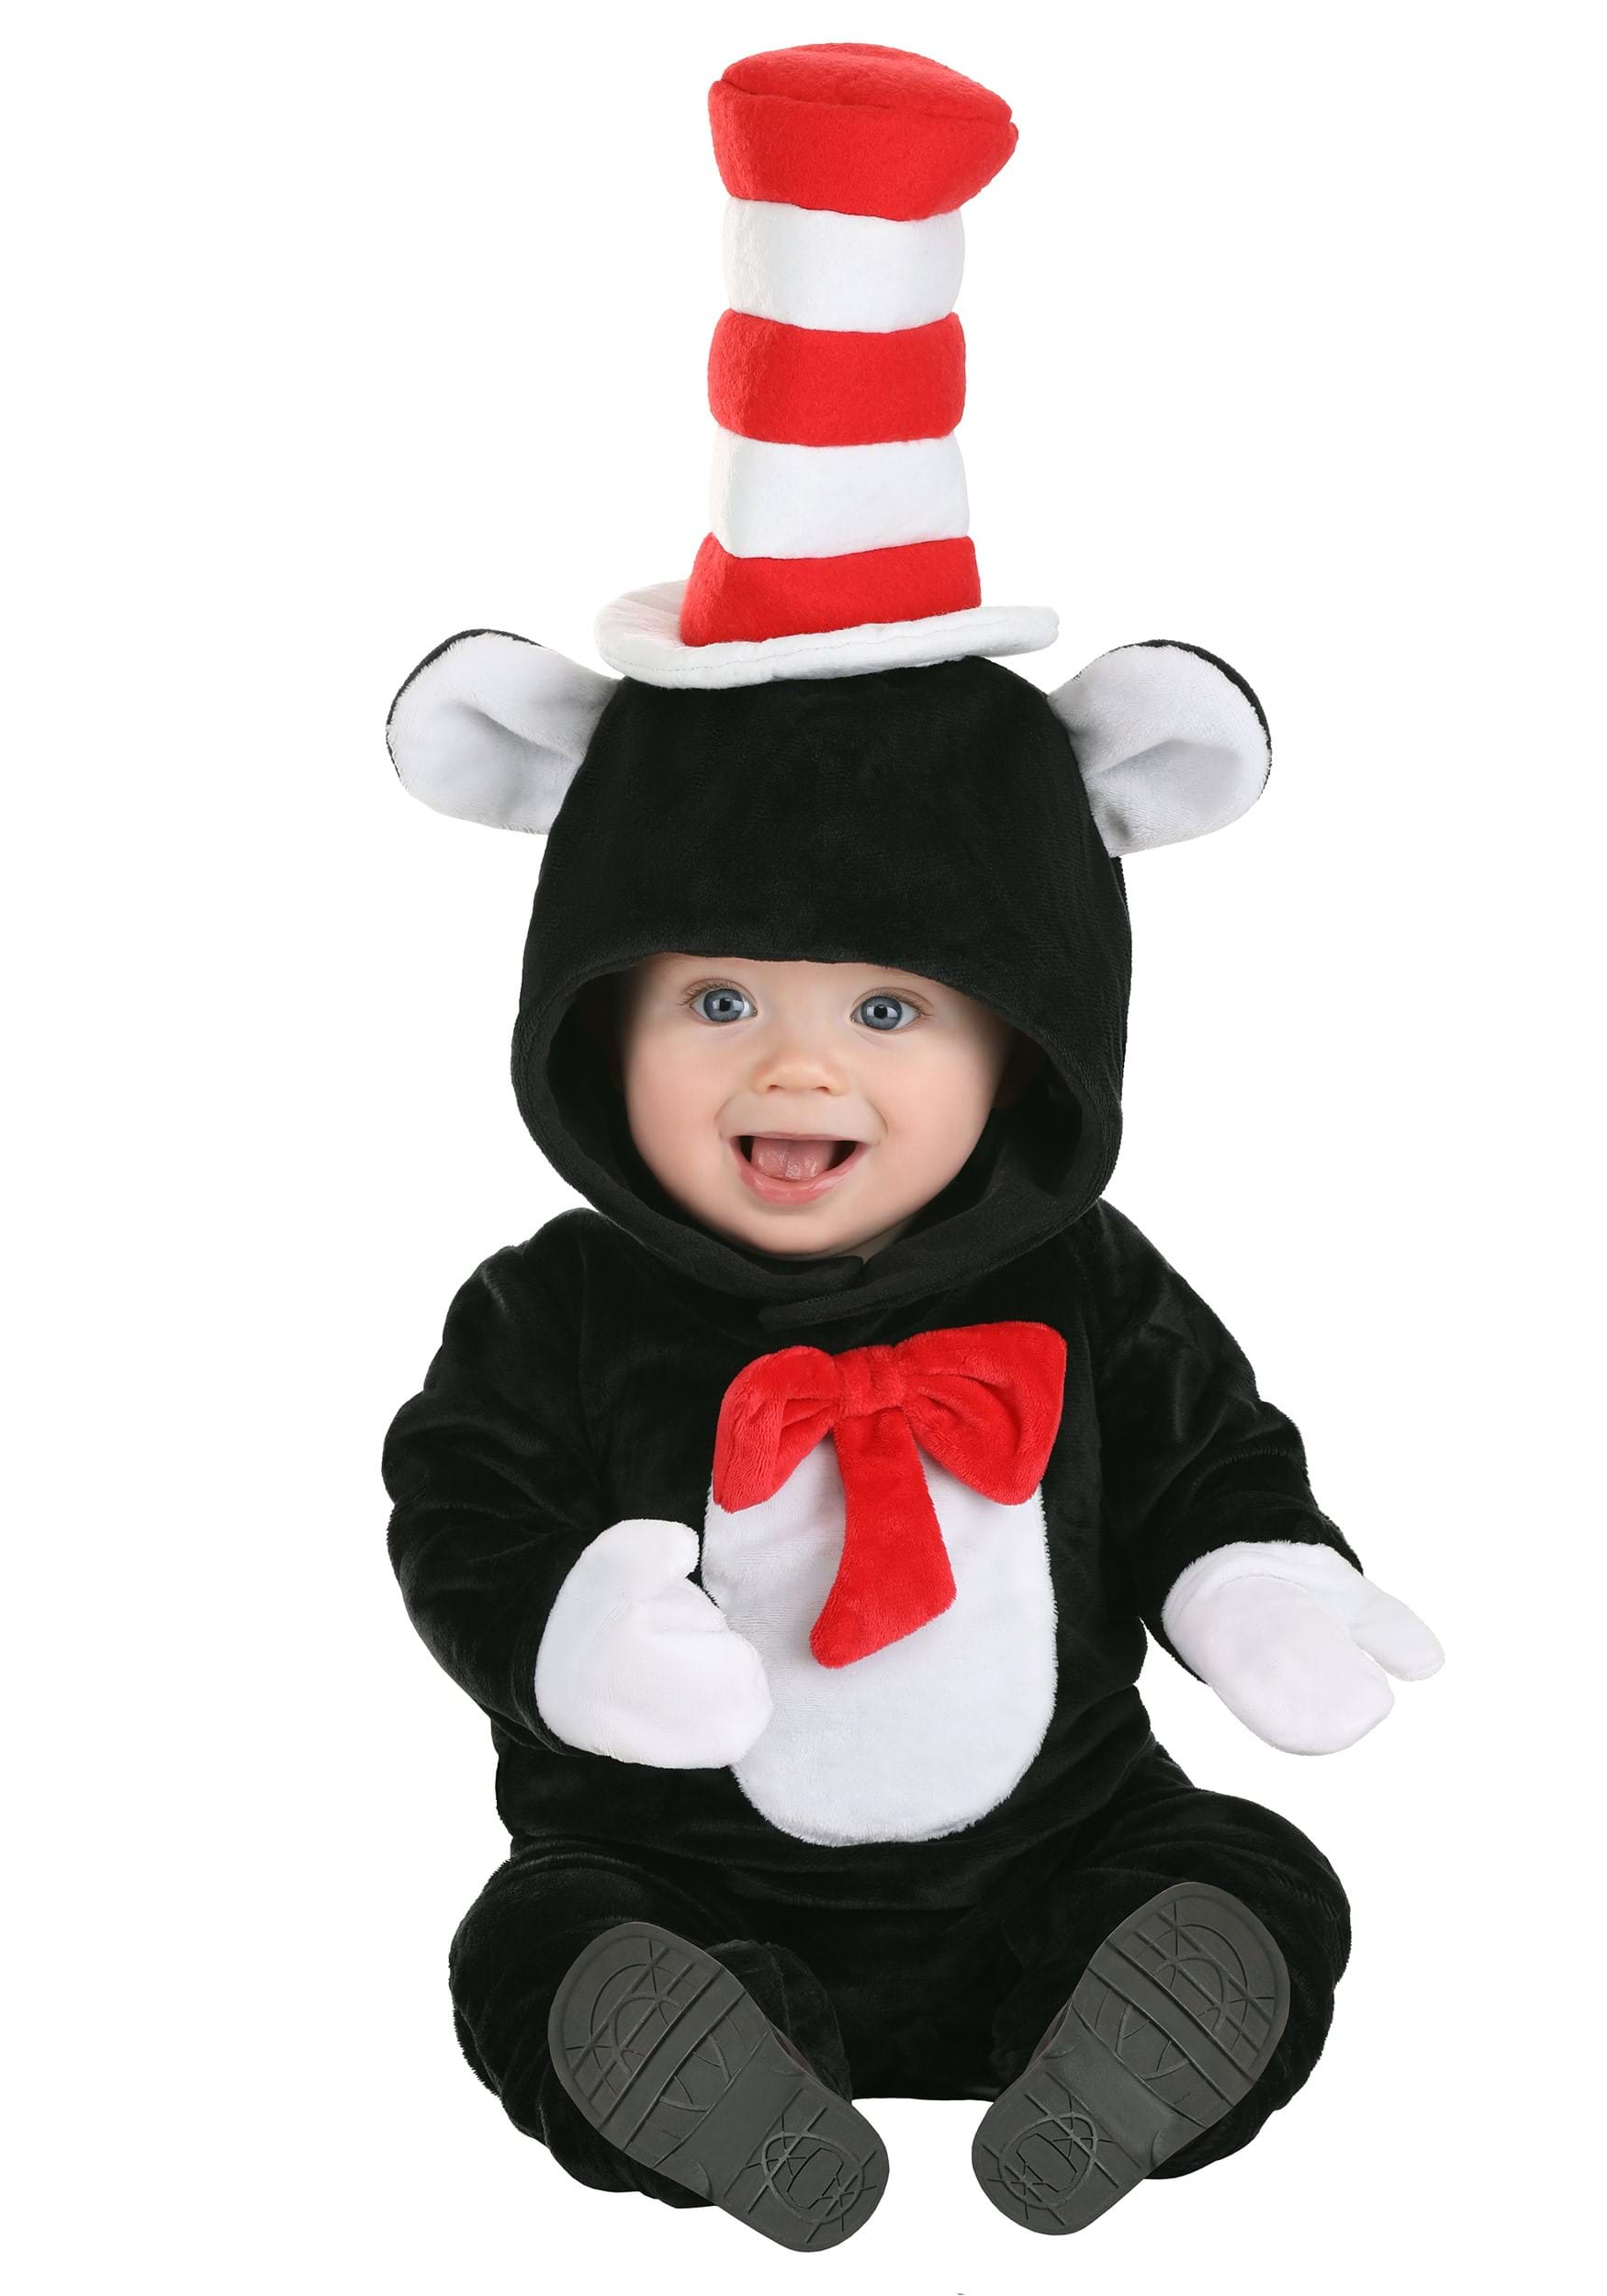 Photos - Fancy Dress CATerpillar FUN Costumes Dr. Seuss The Cat in the Hat Infant Costume | Storybook Costu 